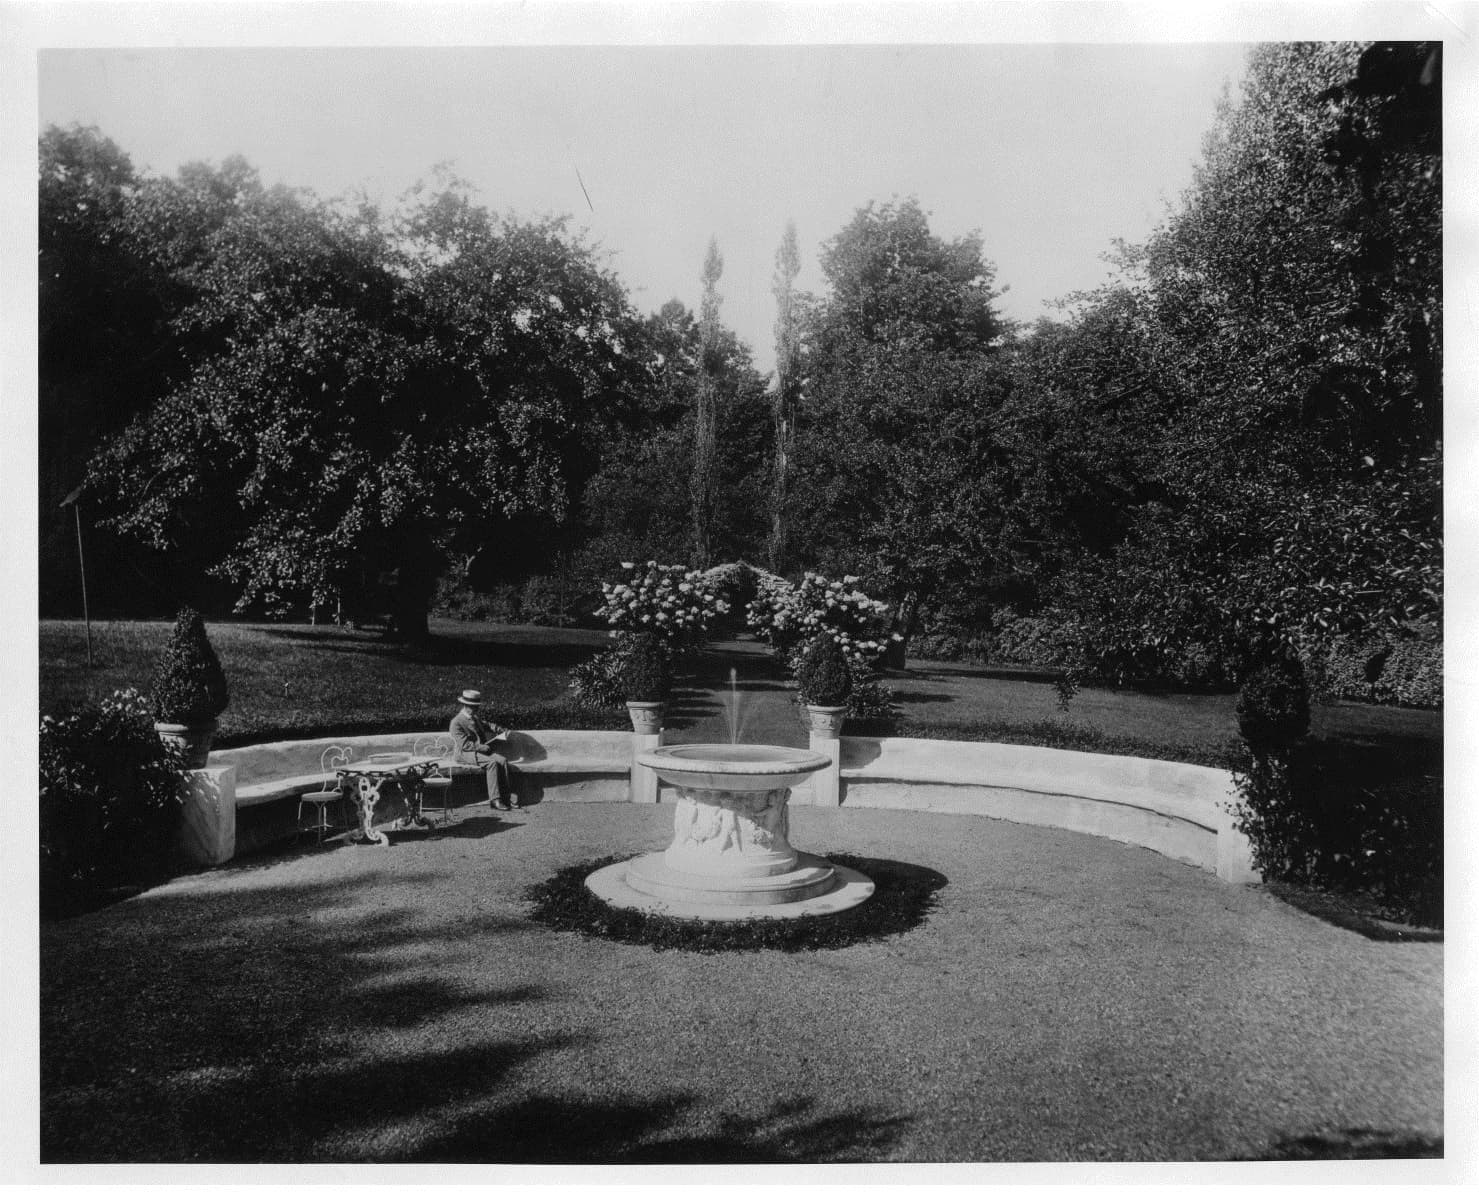 A black and white photo of a rounded garden with American sculptor Daniel Chester French seated on the left side. A fountain at the center. Lots of greenery in the background. The photo is courtesy of the Chesterwood Archives.